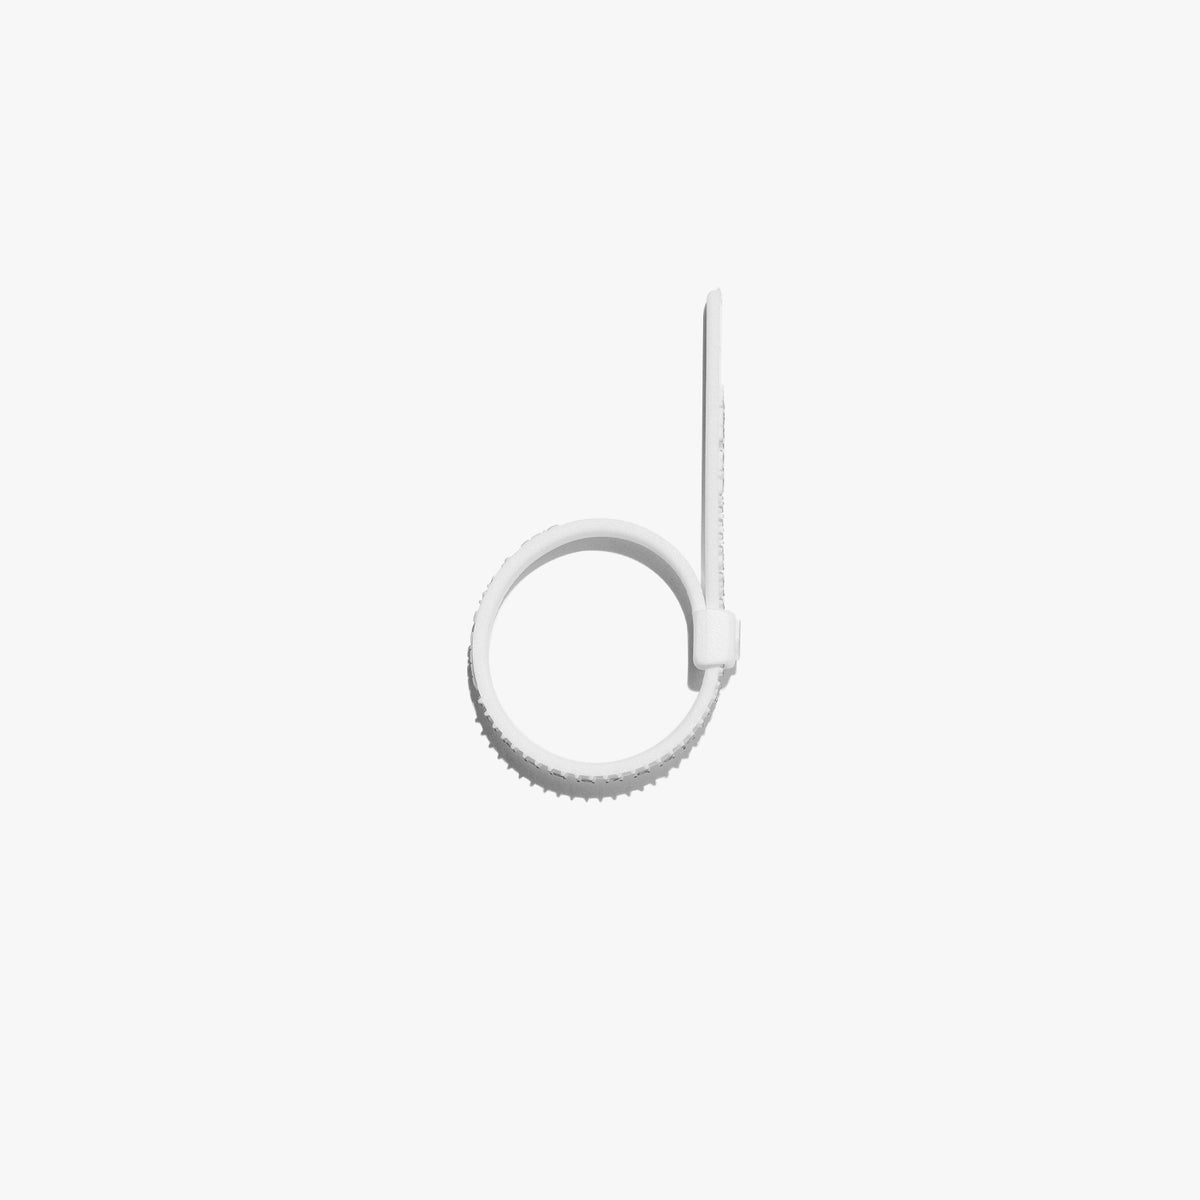 Ring Sizer Tool – Pure Life Jewelry